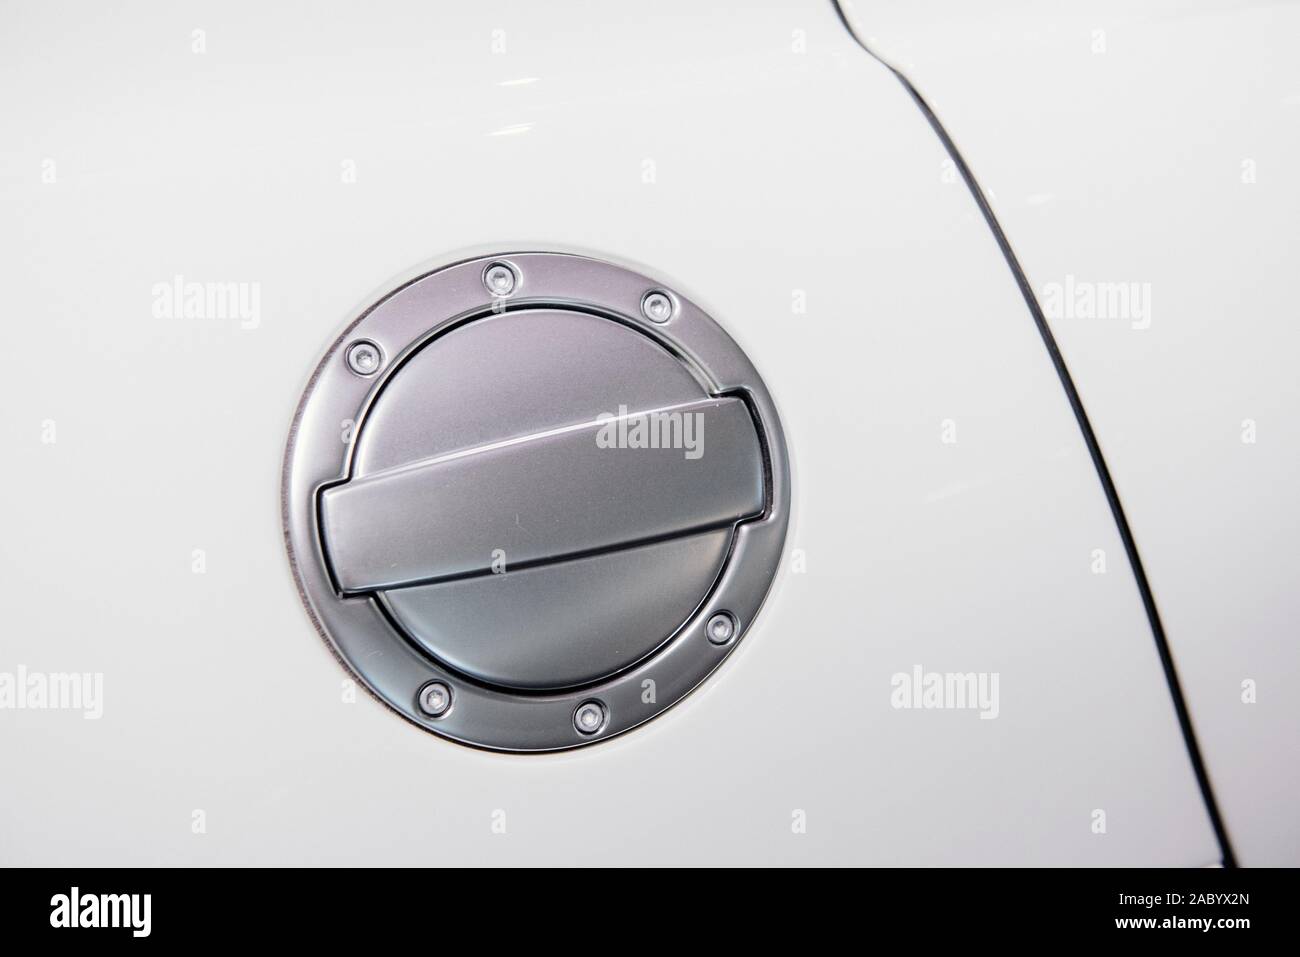 Close up shot of chrome fuel tank cover or gas filler cap of white